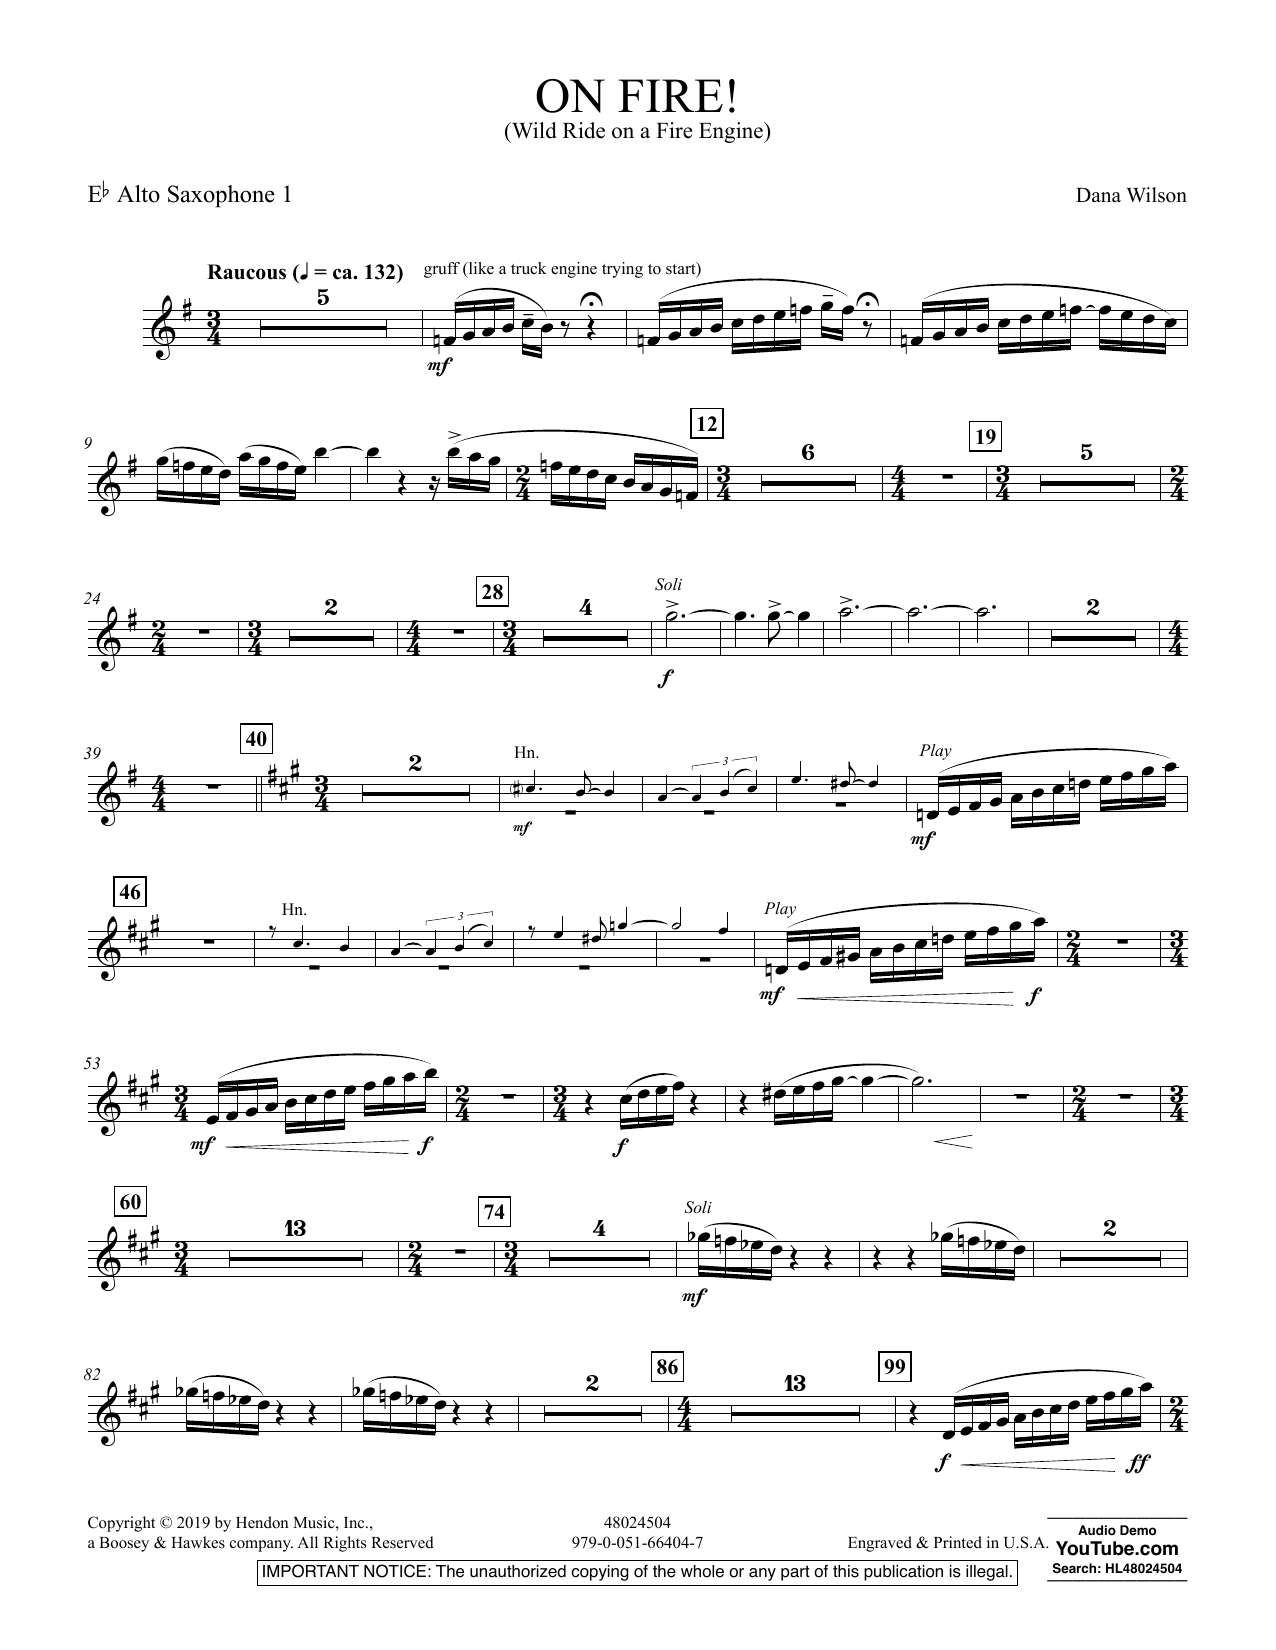 Dana Wilson On Fire! (Wild Ride on a Fire Engine) - Eb Alto Saxophone 1 sheet music preview music notes and score for Concert Band including 2 page(s)